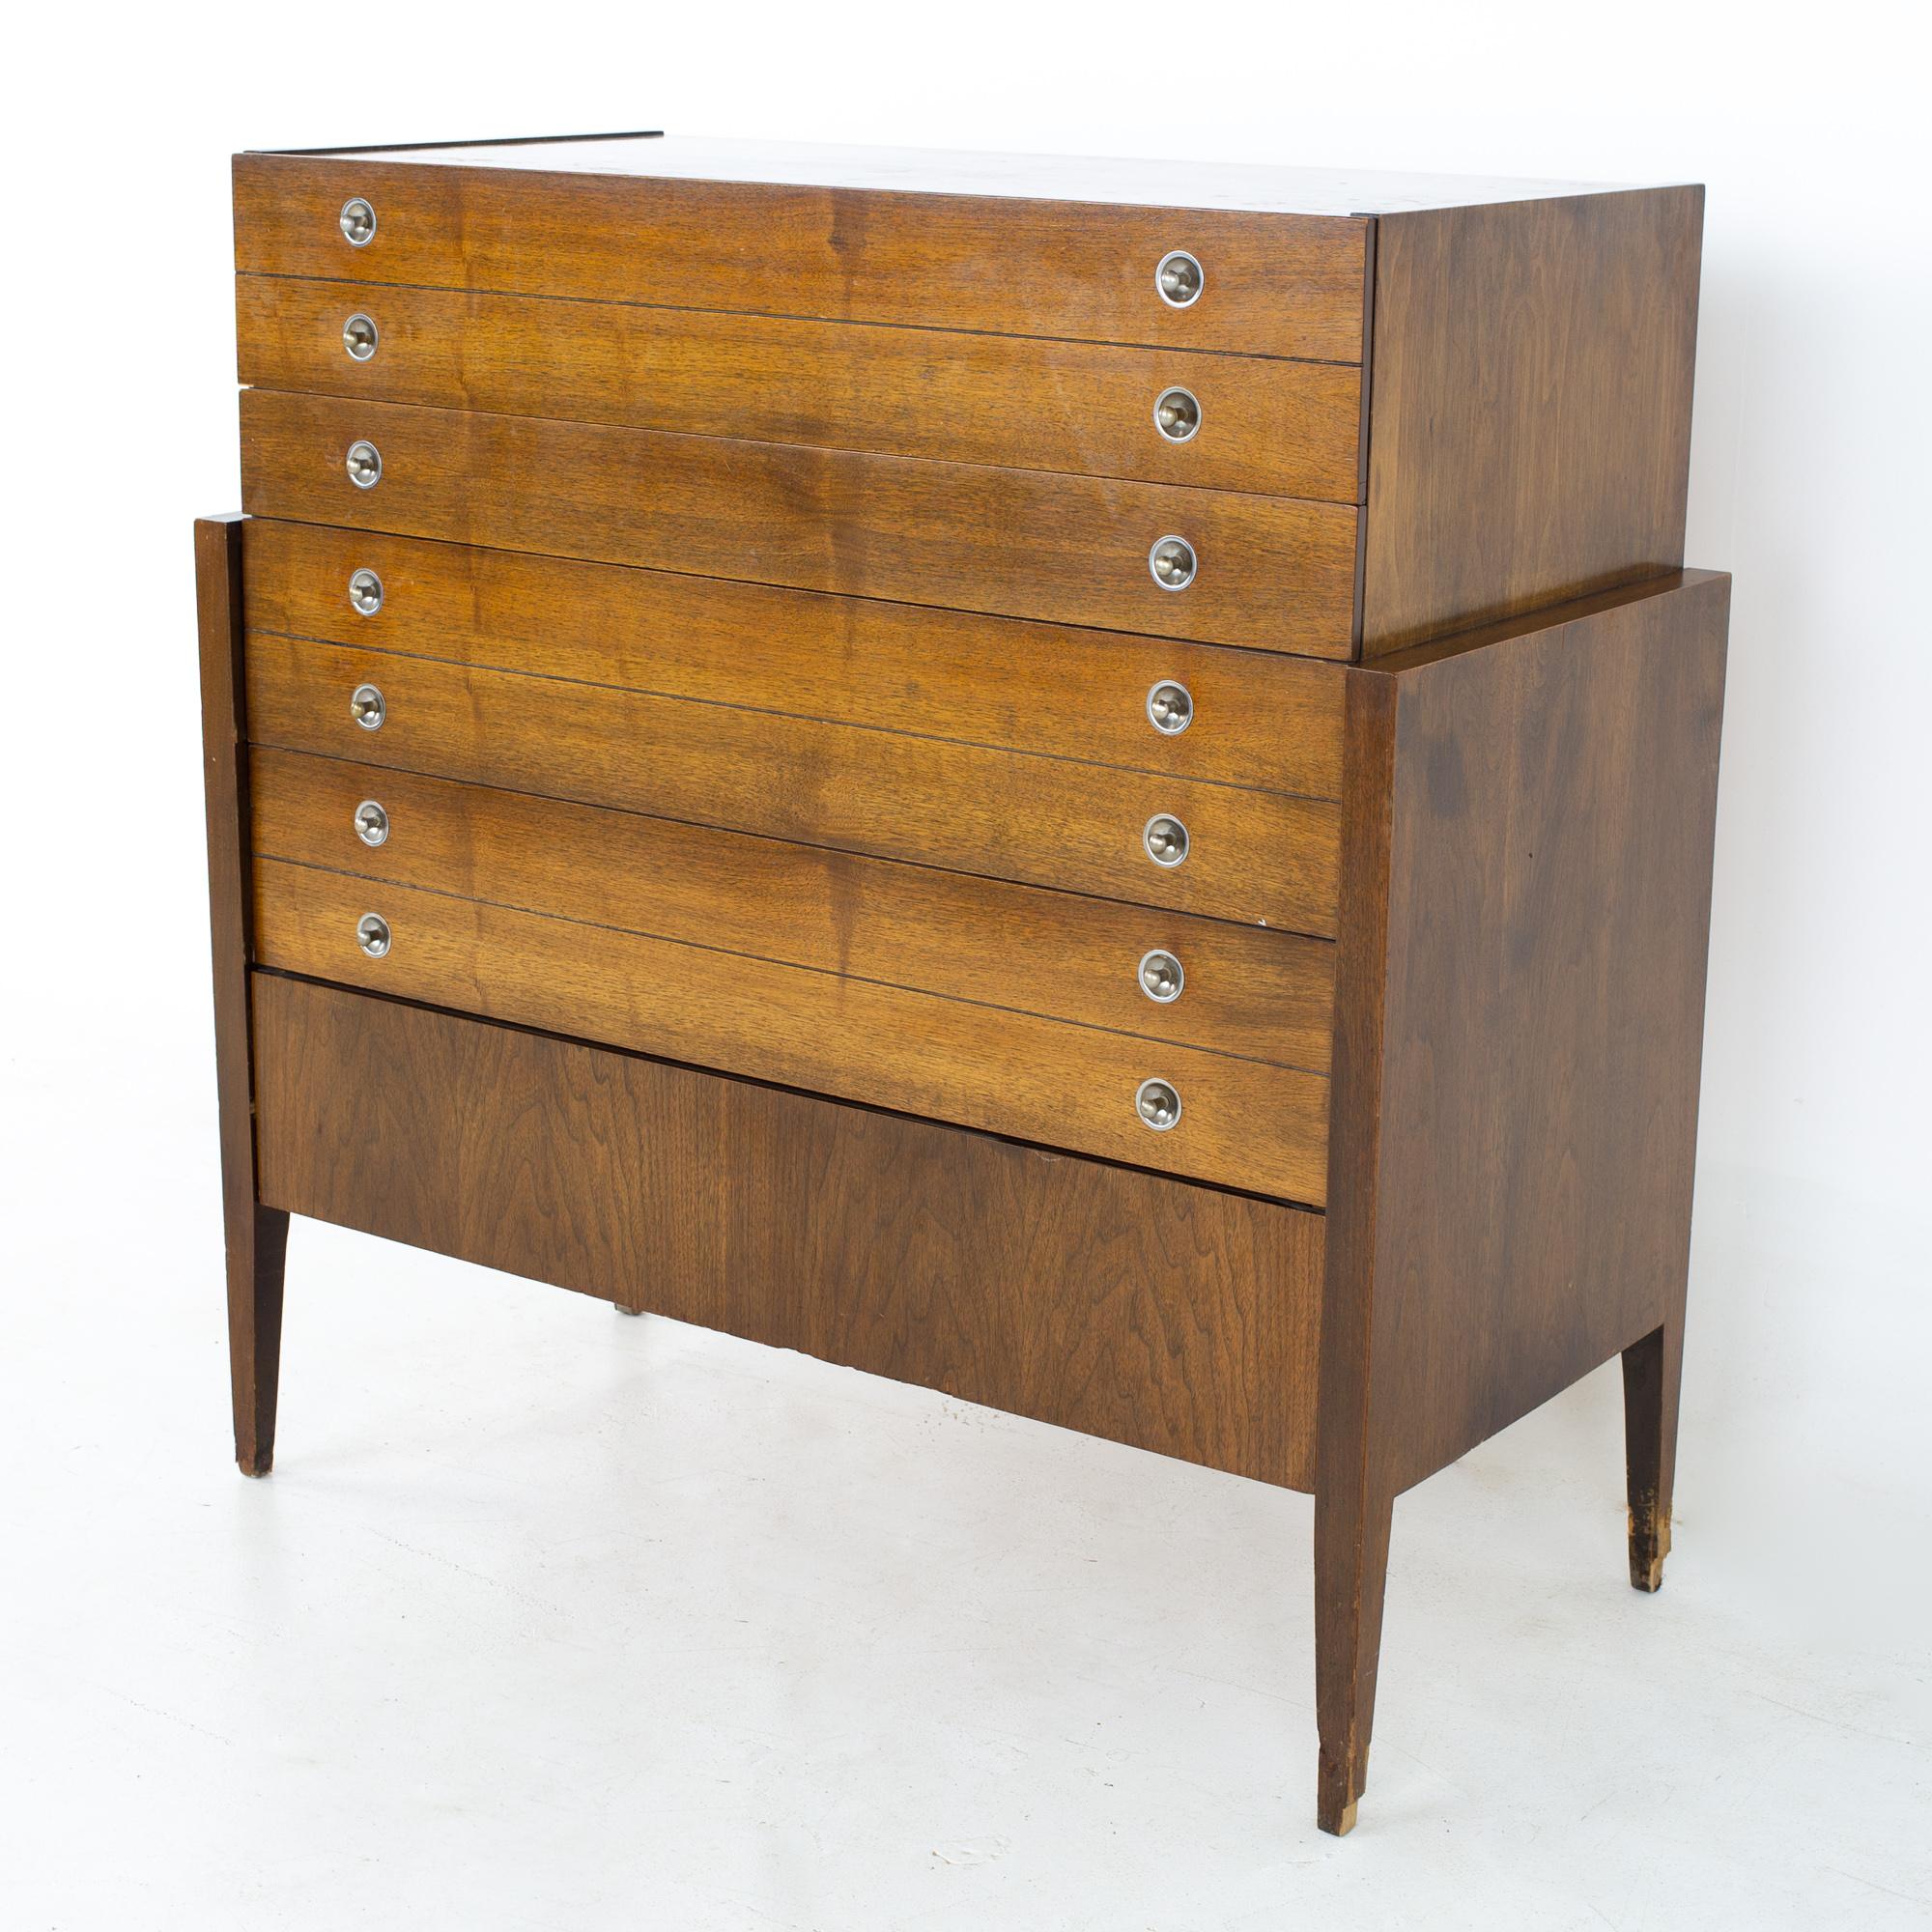 Bassett mid century trim line highboy dresser
Dresser measures: 40 wide x 19 deep x 41.5 inches high

All pieces of furniture can be had in what we call restored vintage condition. That means the piece is restored upon purchase so it’s free of